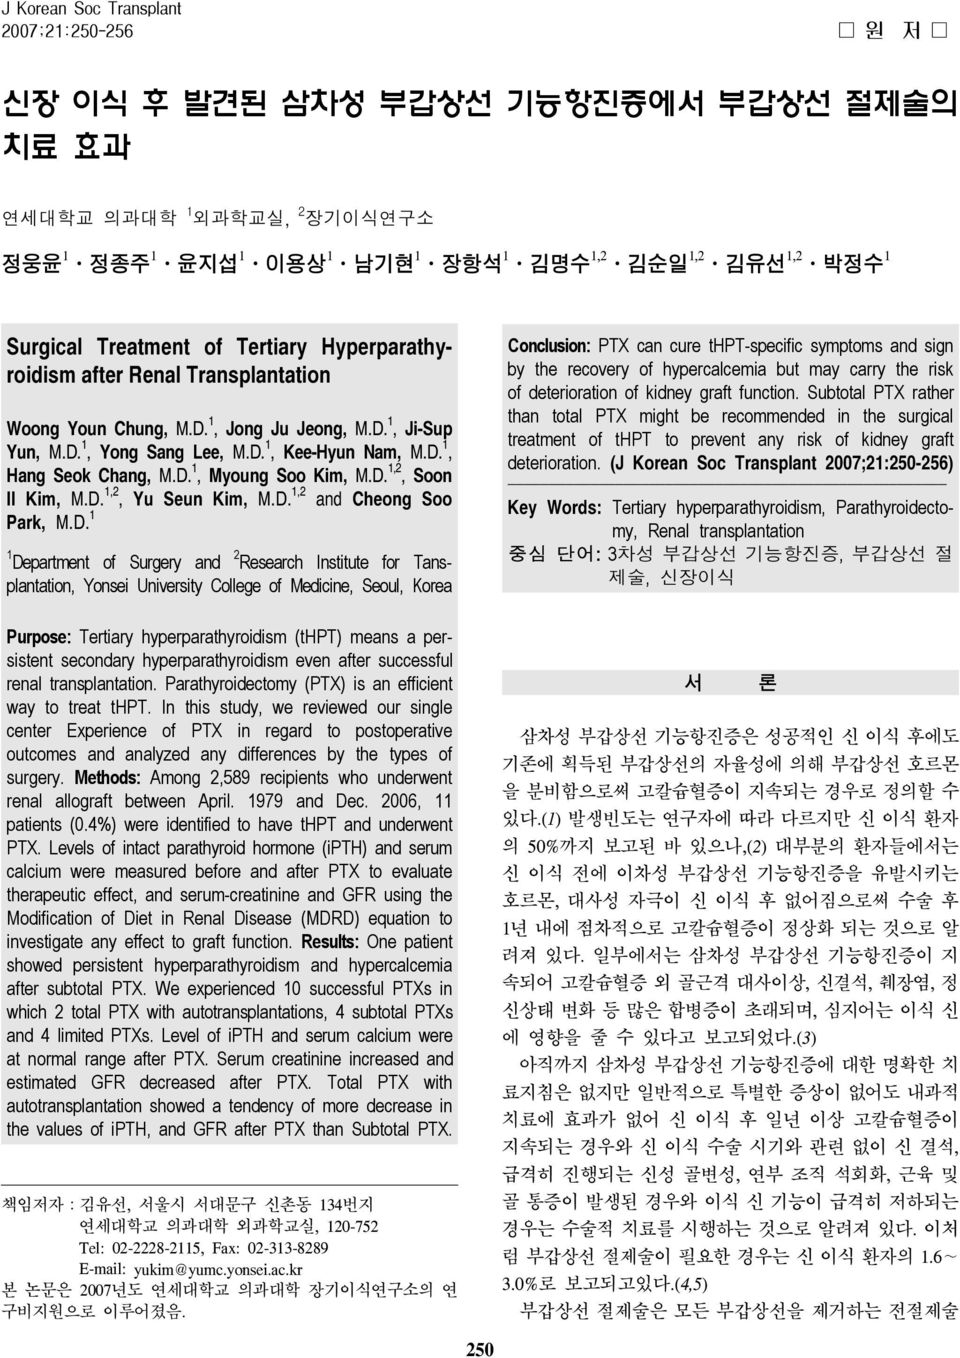 D. 1, Myoung Soo Kim, M.D. 1,2, Soon Il Kim, M.D. 1,2, Yu Seun Kim, M.D. 1,2 and Cheong Soo Park, M.D. 1 1 Department of Surgery and 2 Research Institute for Tansplantation, Yonsei University College